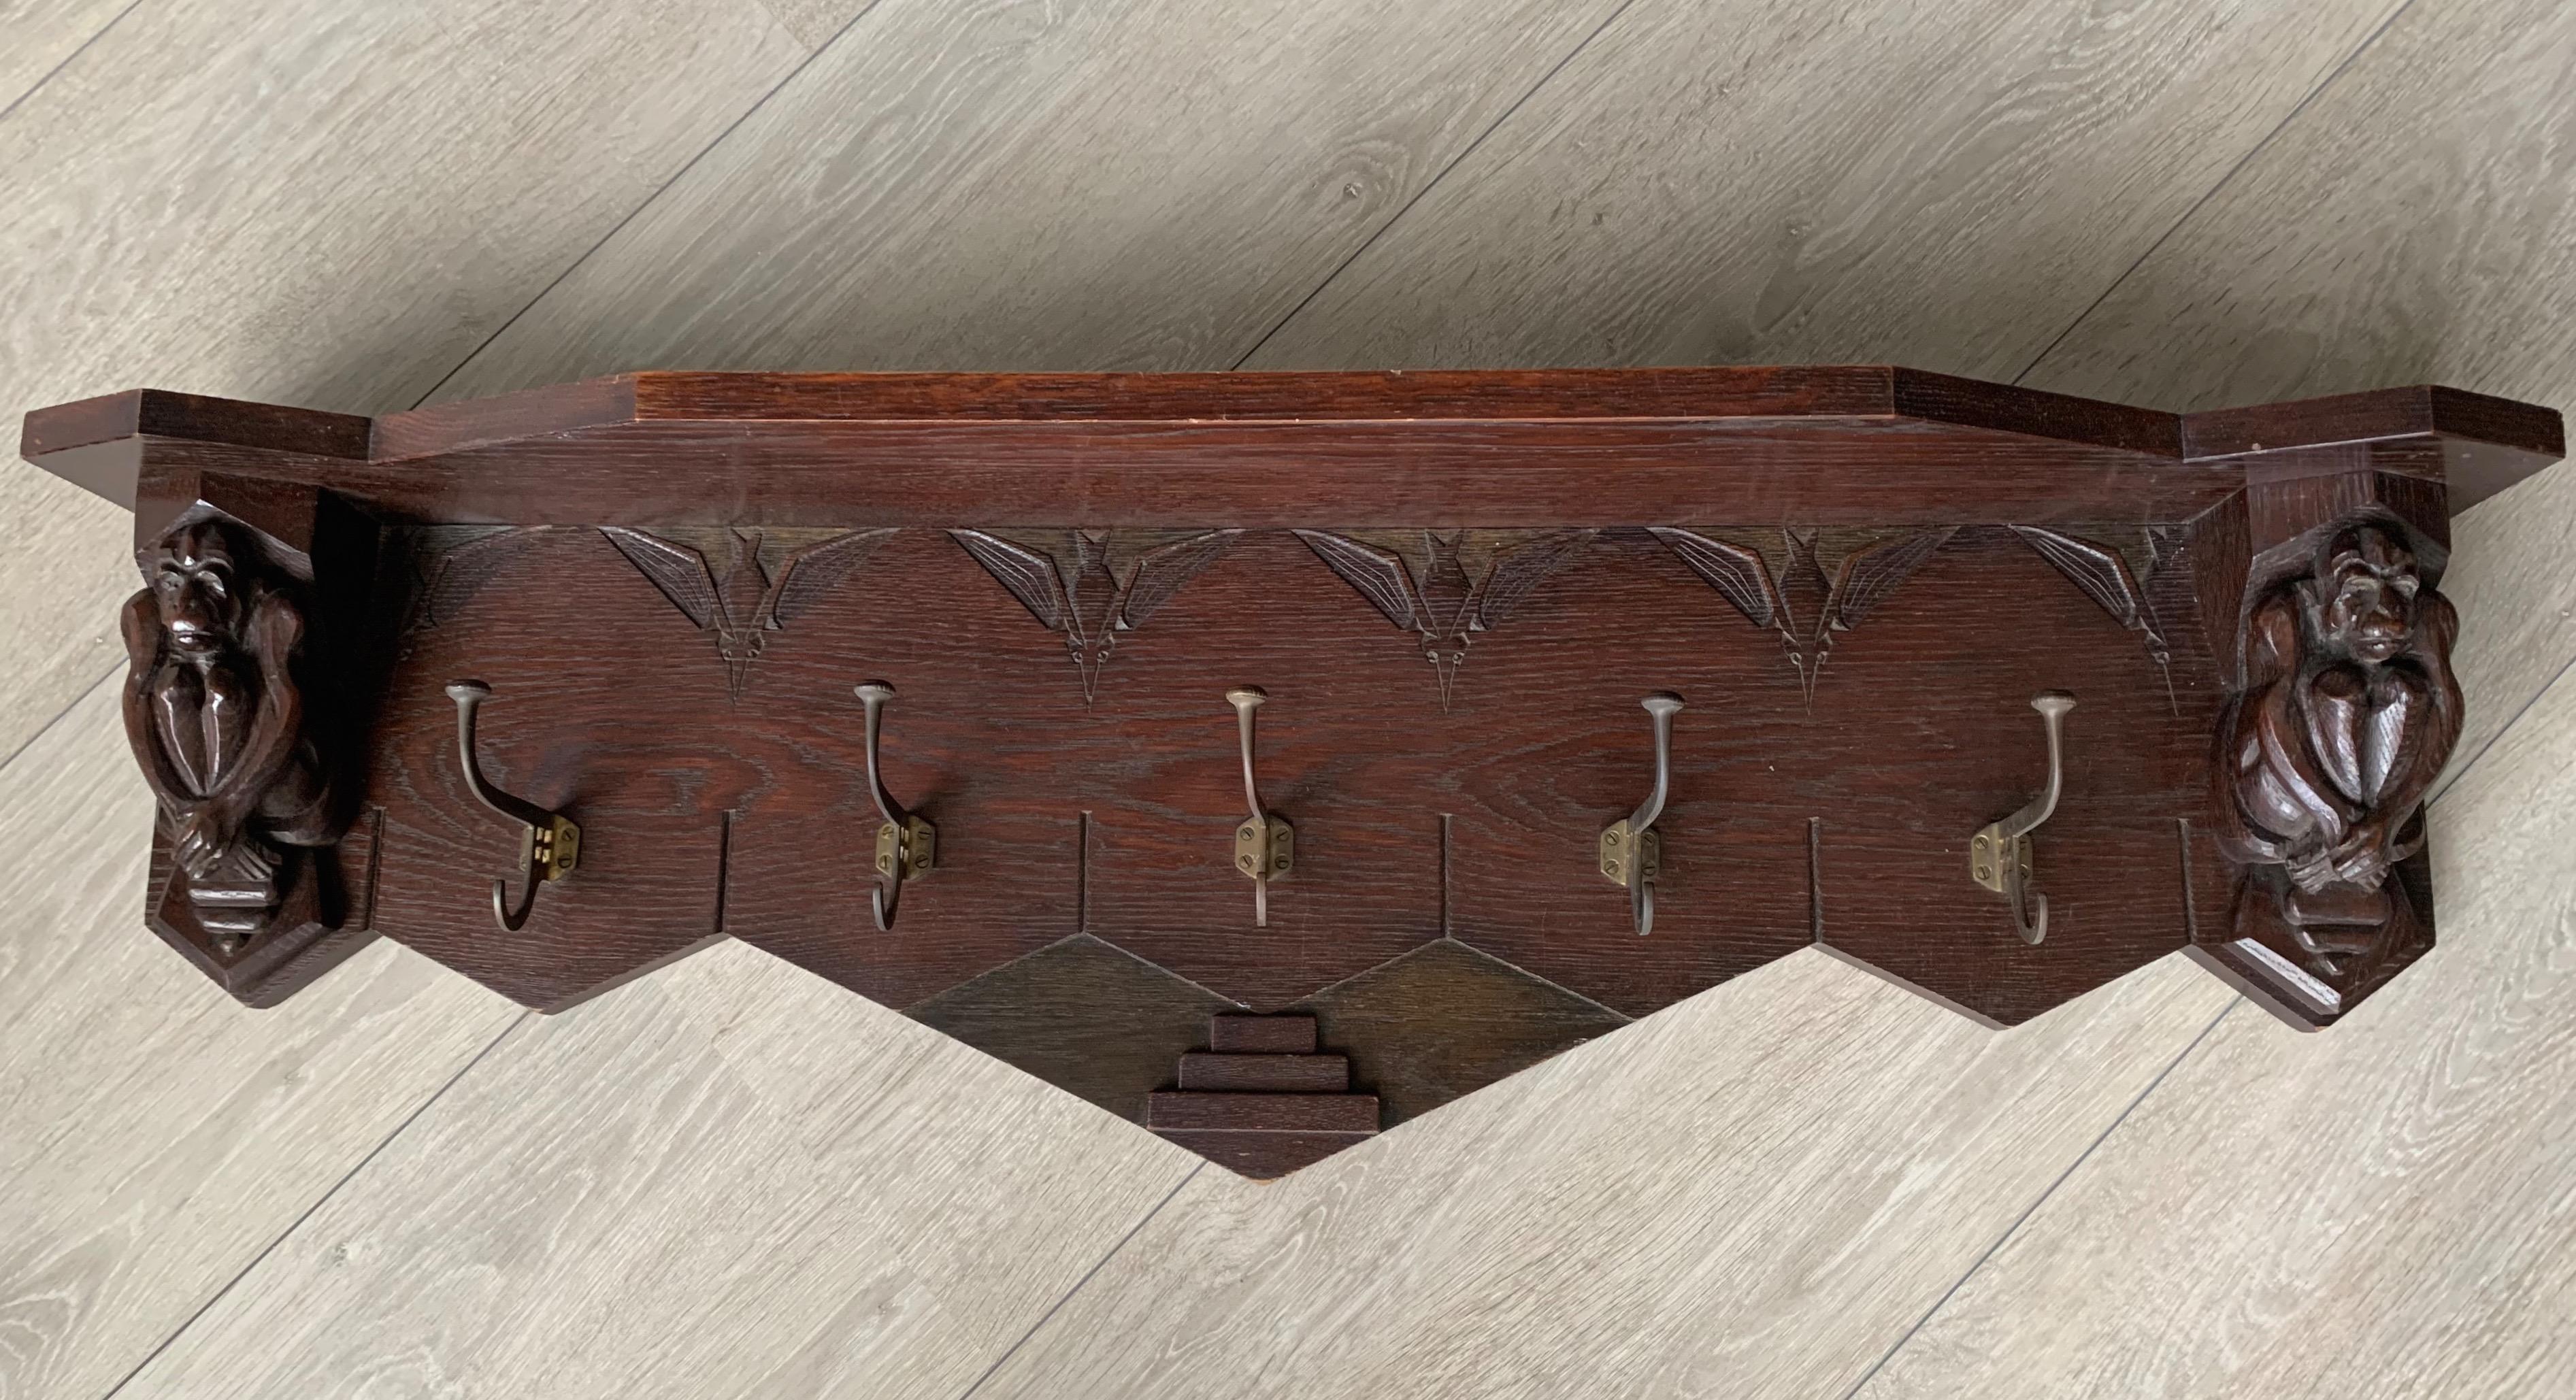 Stunning antique coat rack made of oak with stylish brass hooks.

If you are a collector of handcrafted, early 20th century decorative art then this striking, sculptural coat rack could be gracing your entrance soon. This rare and wonderful looking